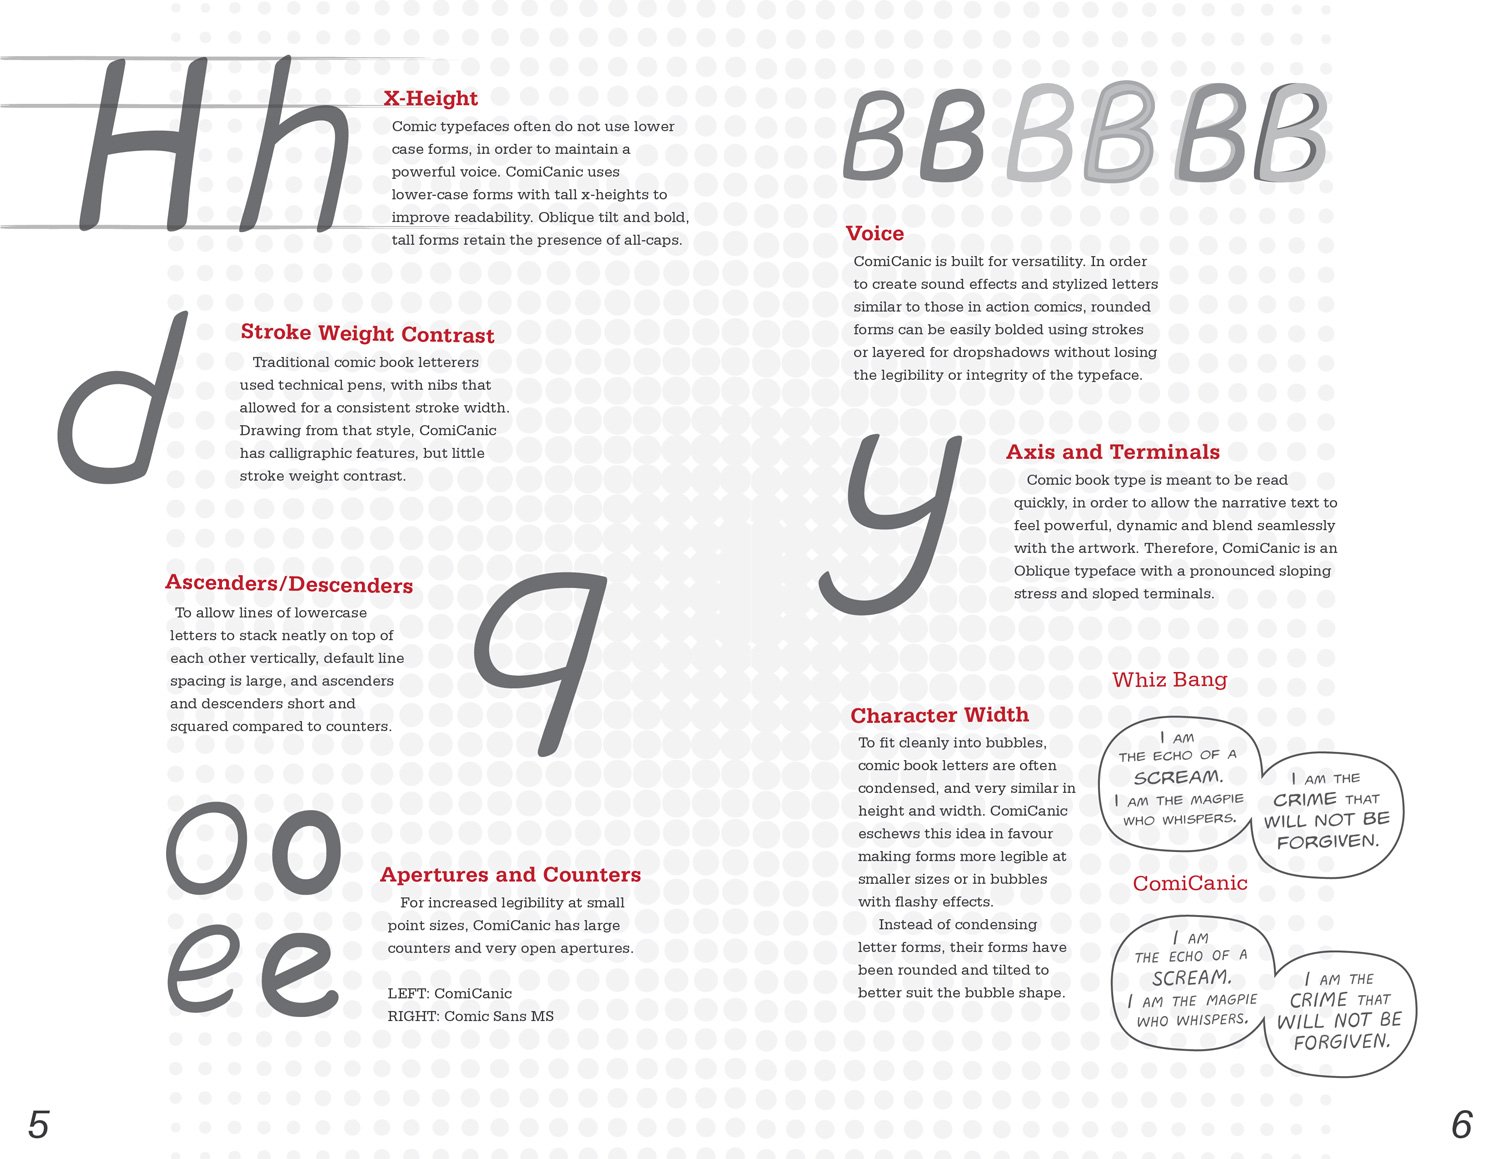 Images describing the different features of the typeface Comicanic